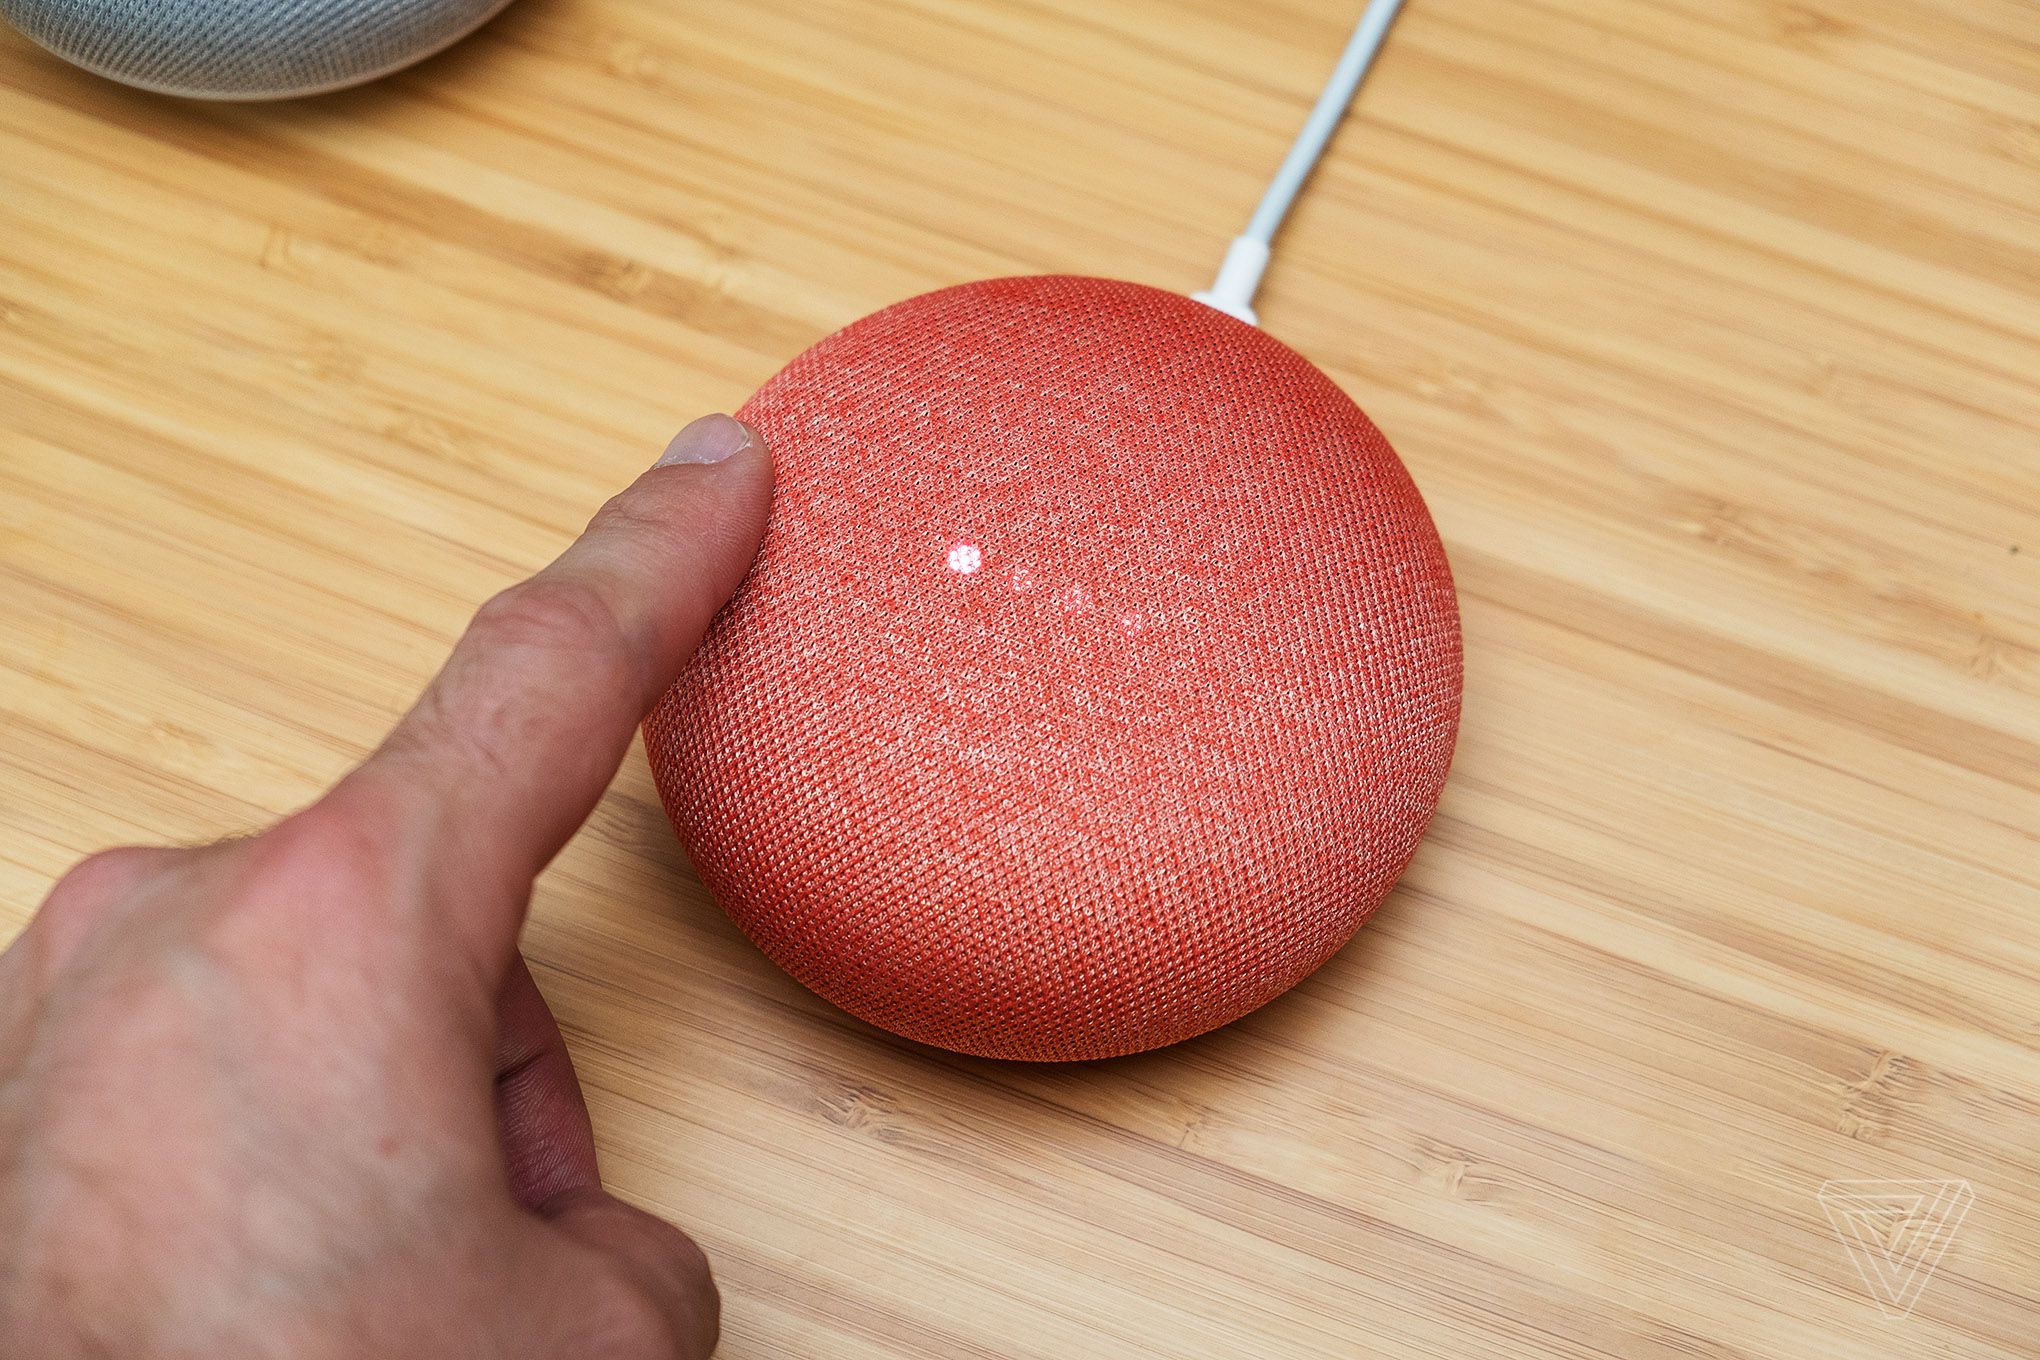 Google smart speaker can be used by attacker to listen in to your private conversations